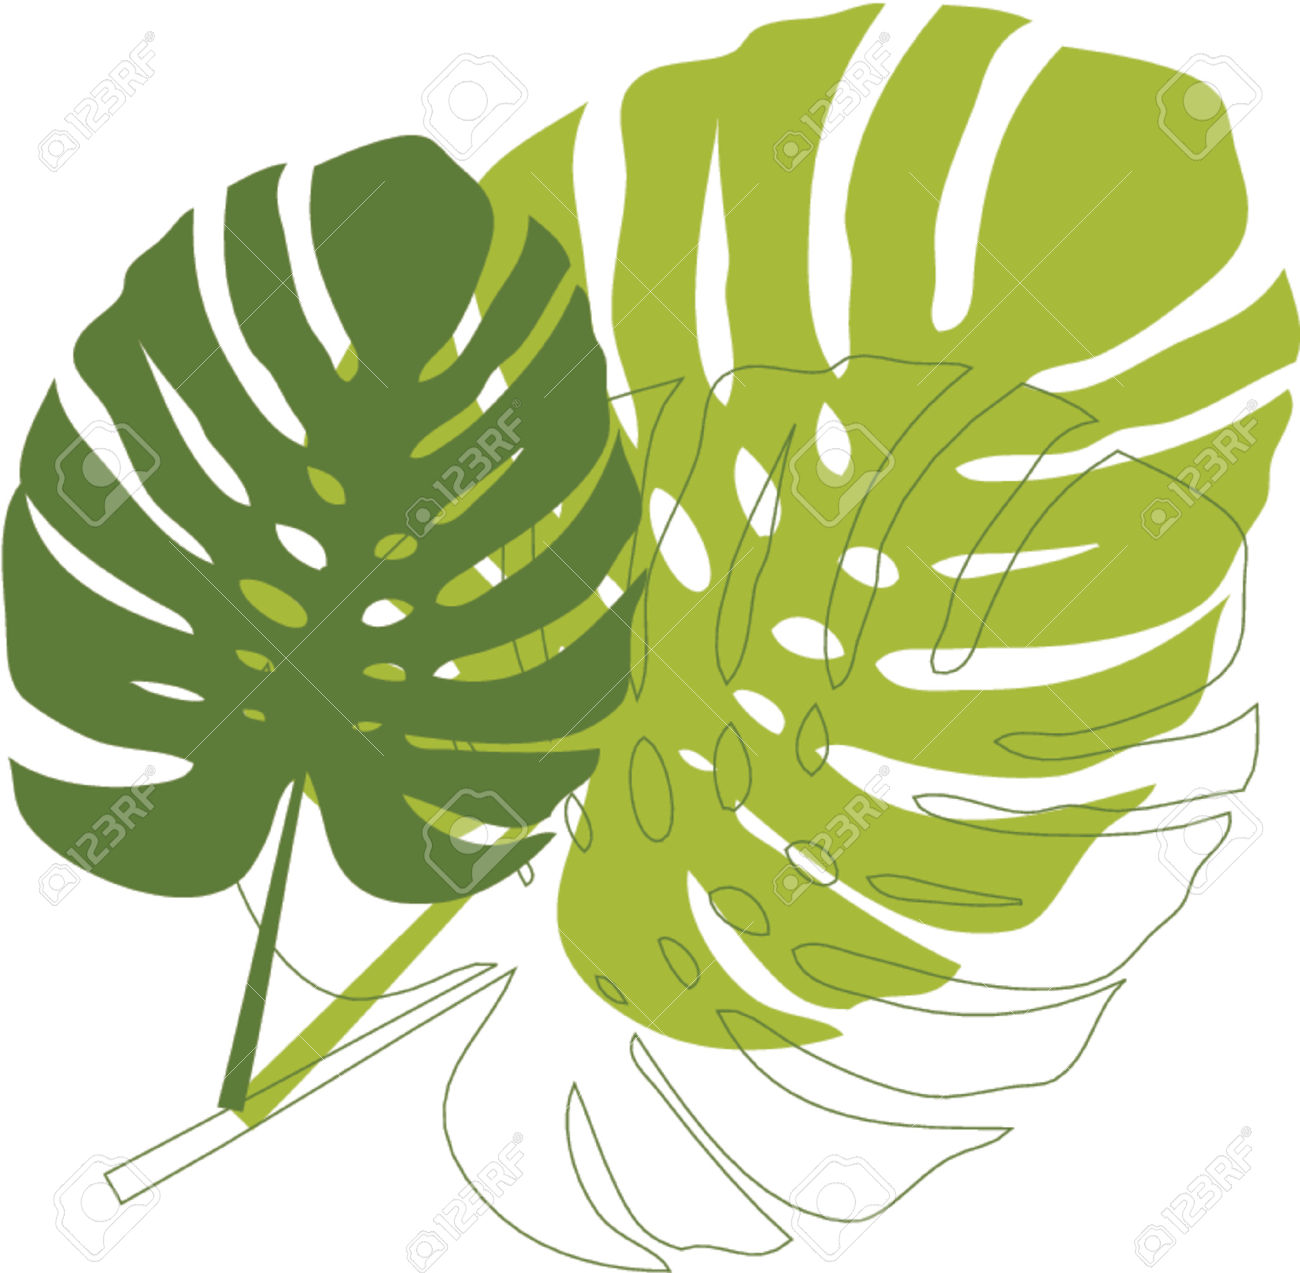 Related Keywords & Suggestions for Rainforest Leaves Clipart.